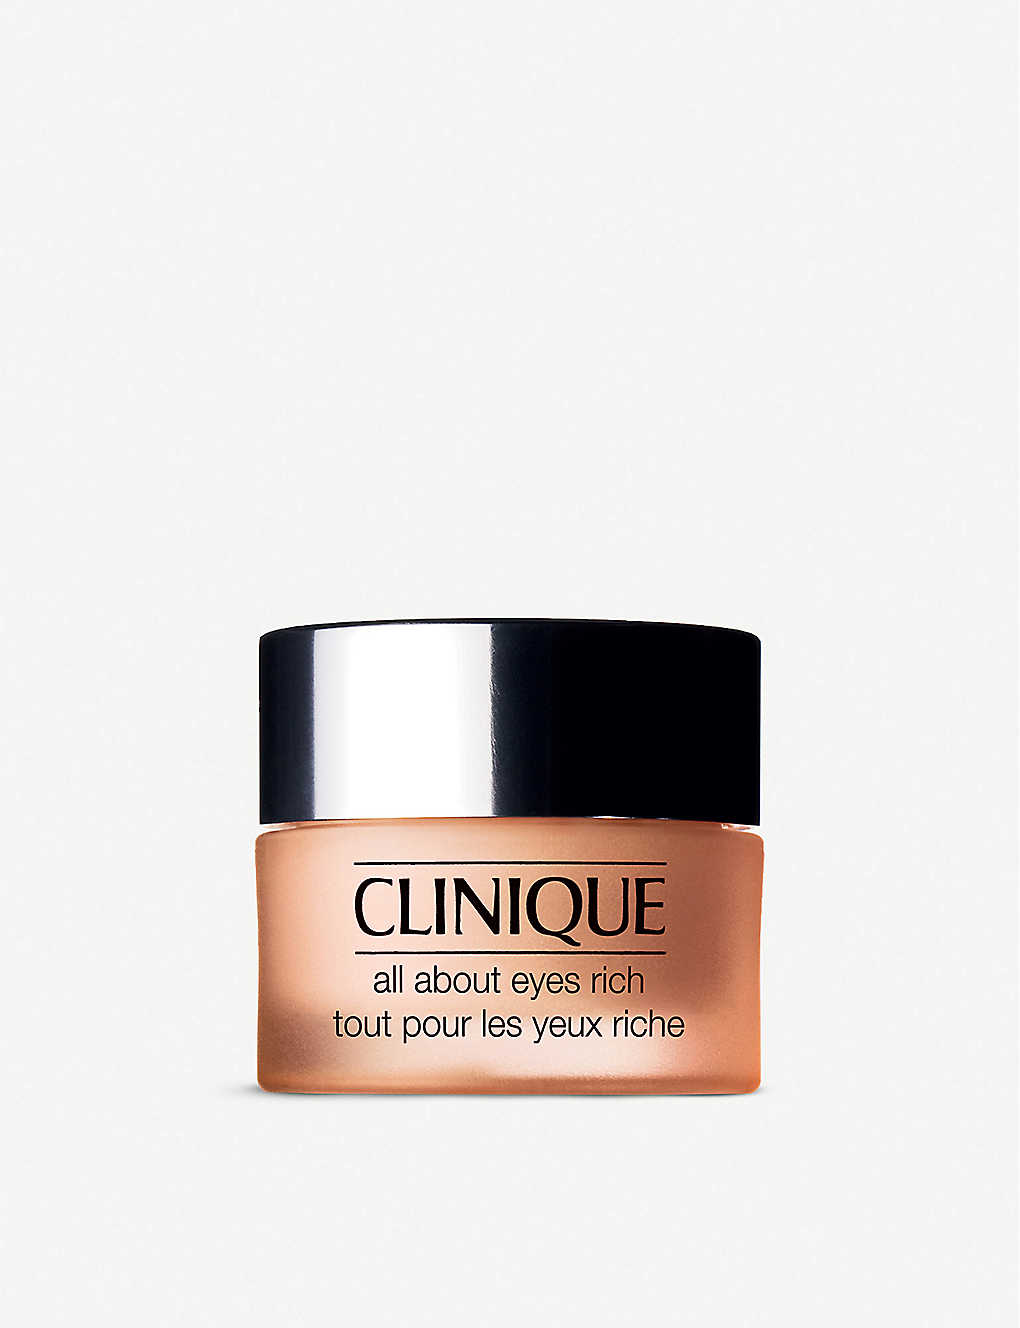 Clinique All About Eyes Rich 30ml